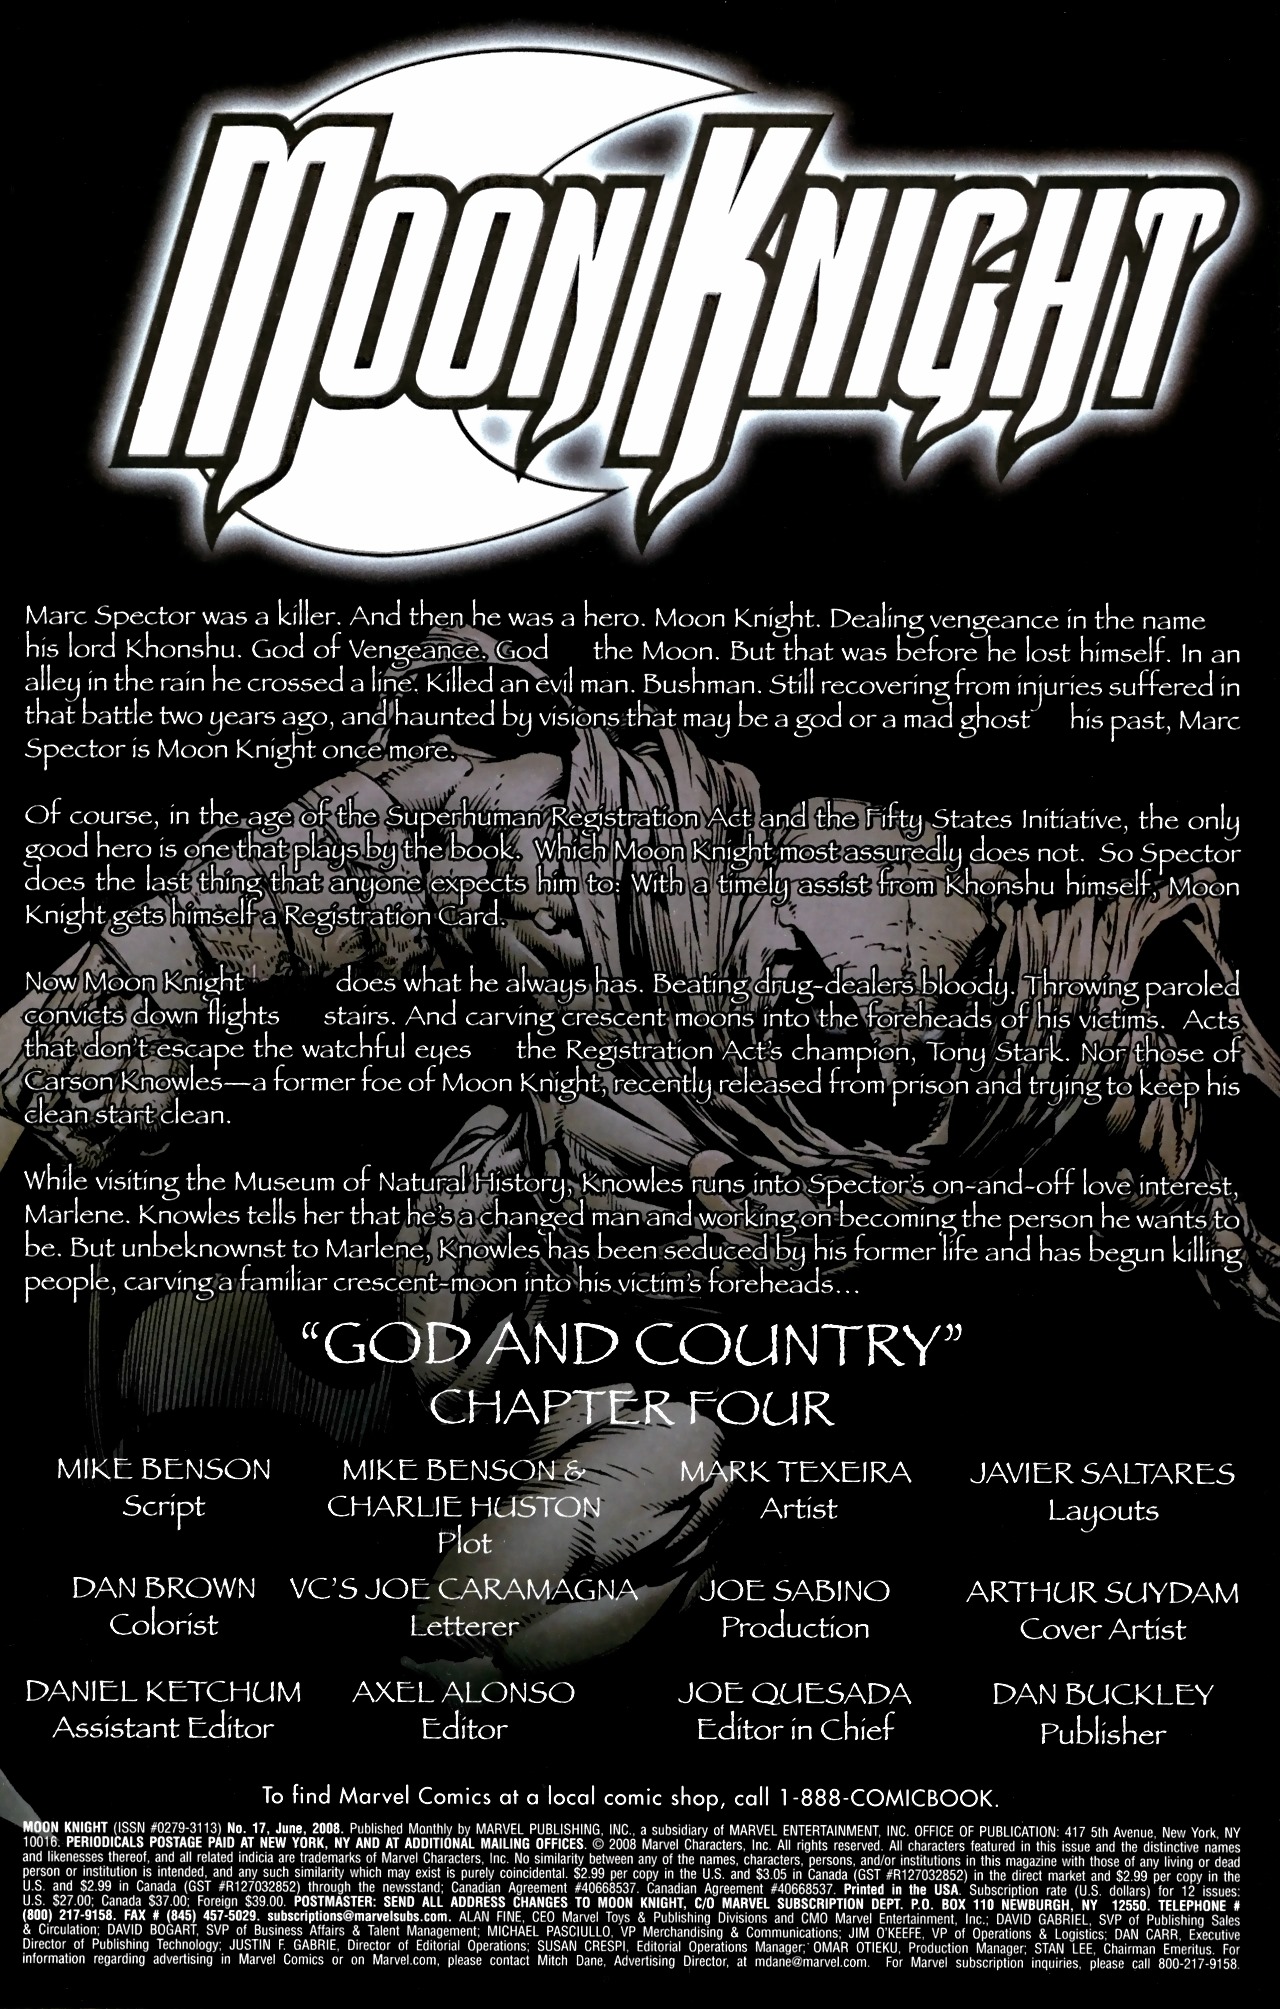  Moon Knight #17 - God and Country, Chapter Four